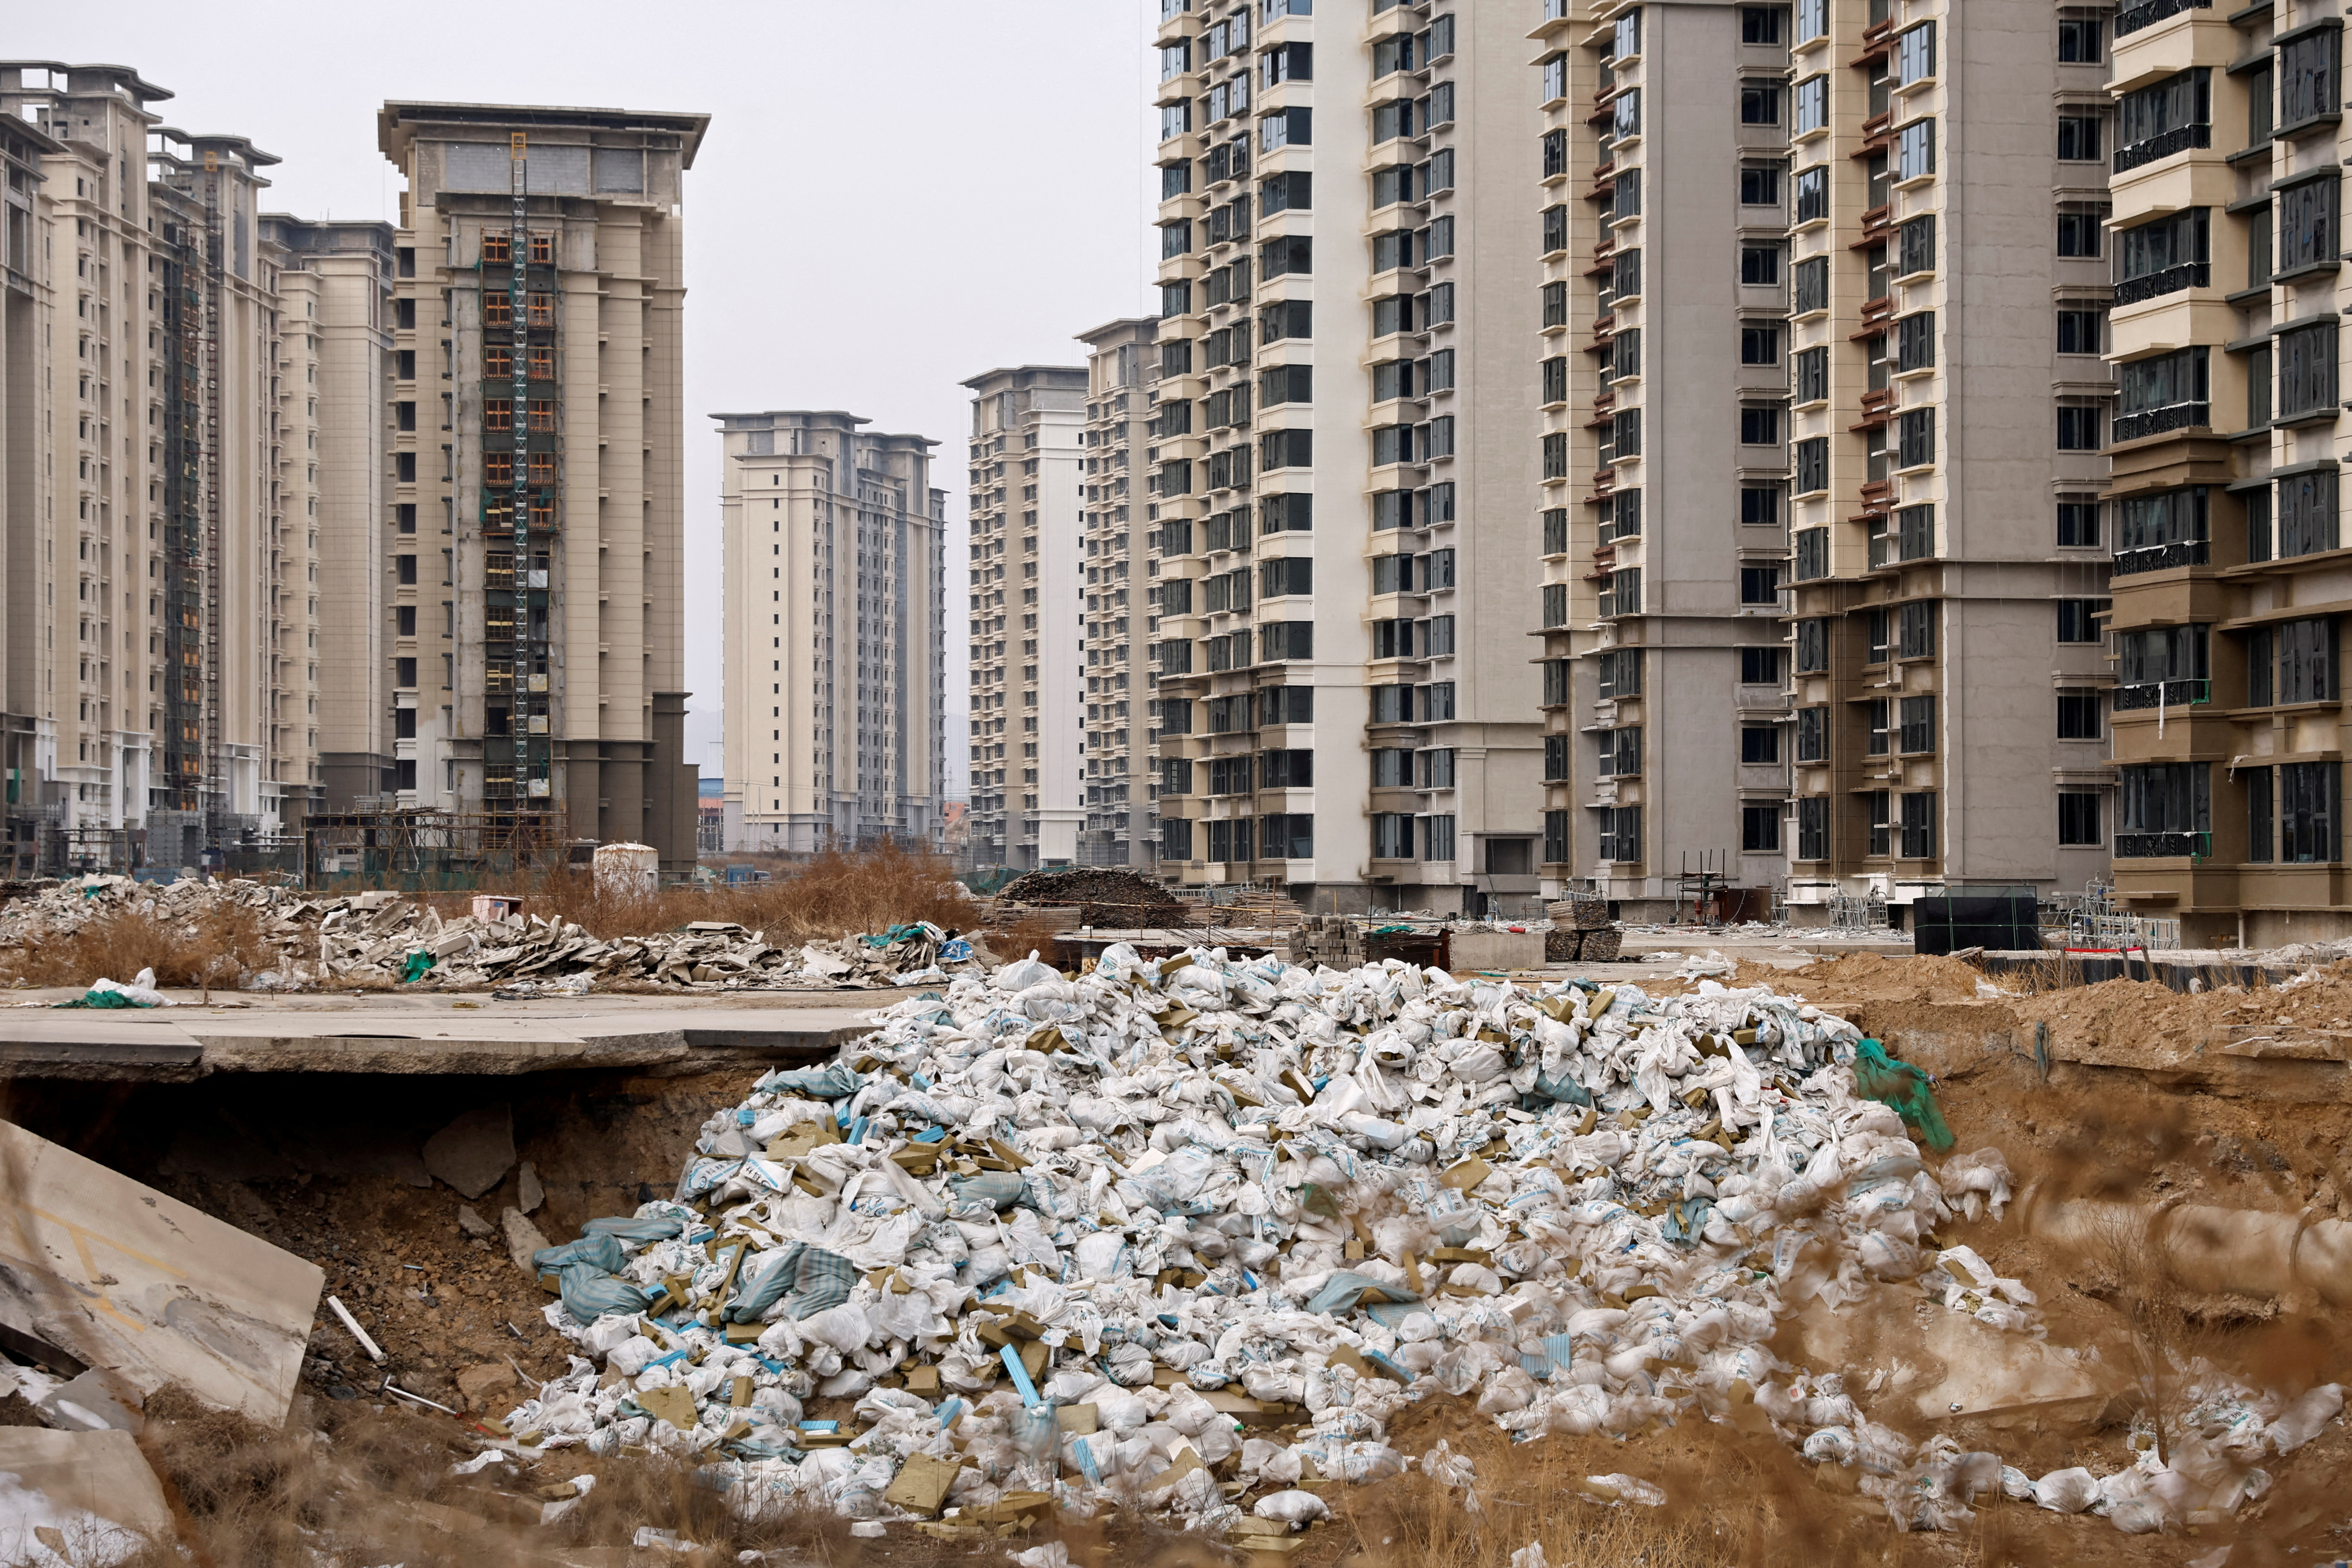 Unfinished residential development by China Evergrande Group, in the outskirts of Shijiazhuang